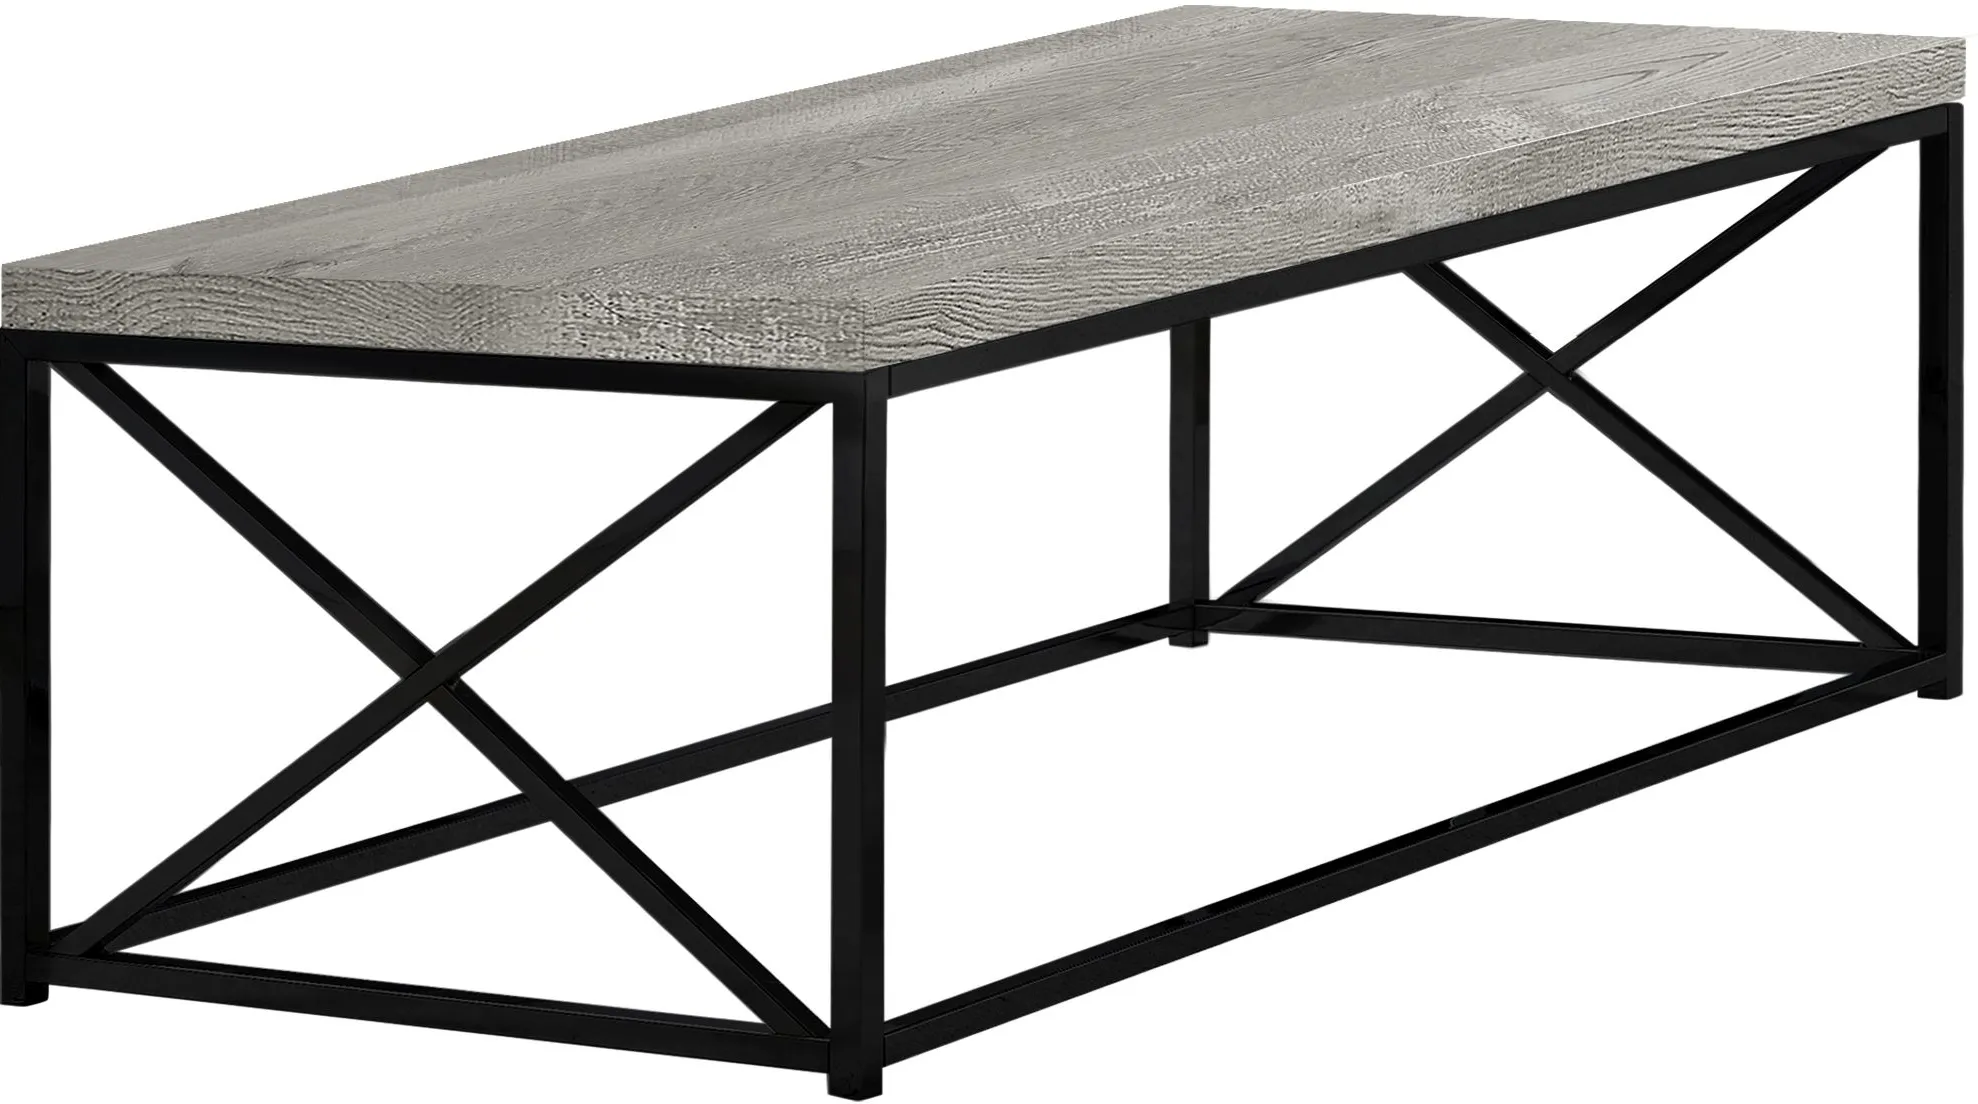 Coffee Table, Accent, Cocktail, Rectangular, Living Room, 44"L, Metal, Laminate, Grey, Black, Contemporary, Modern